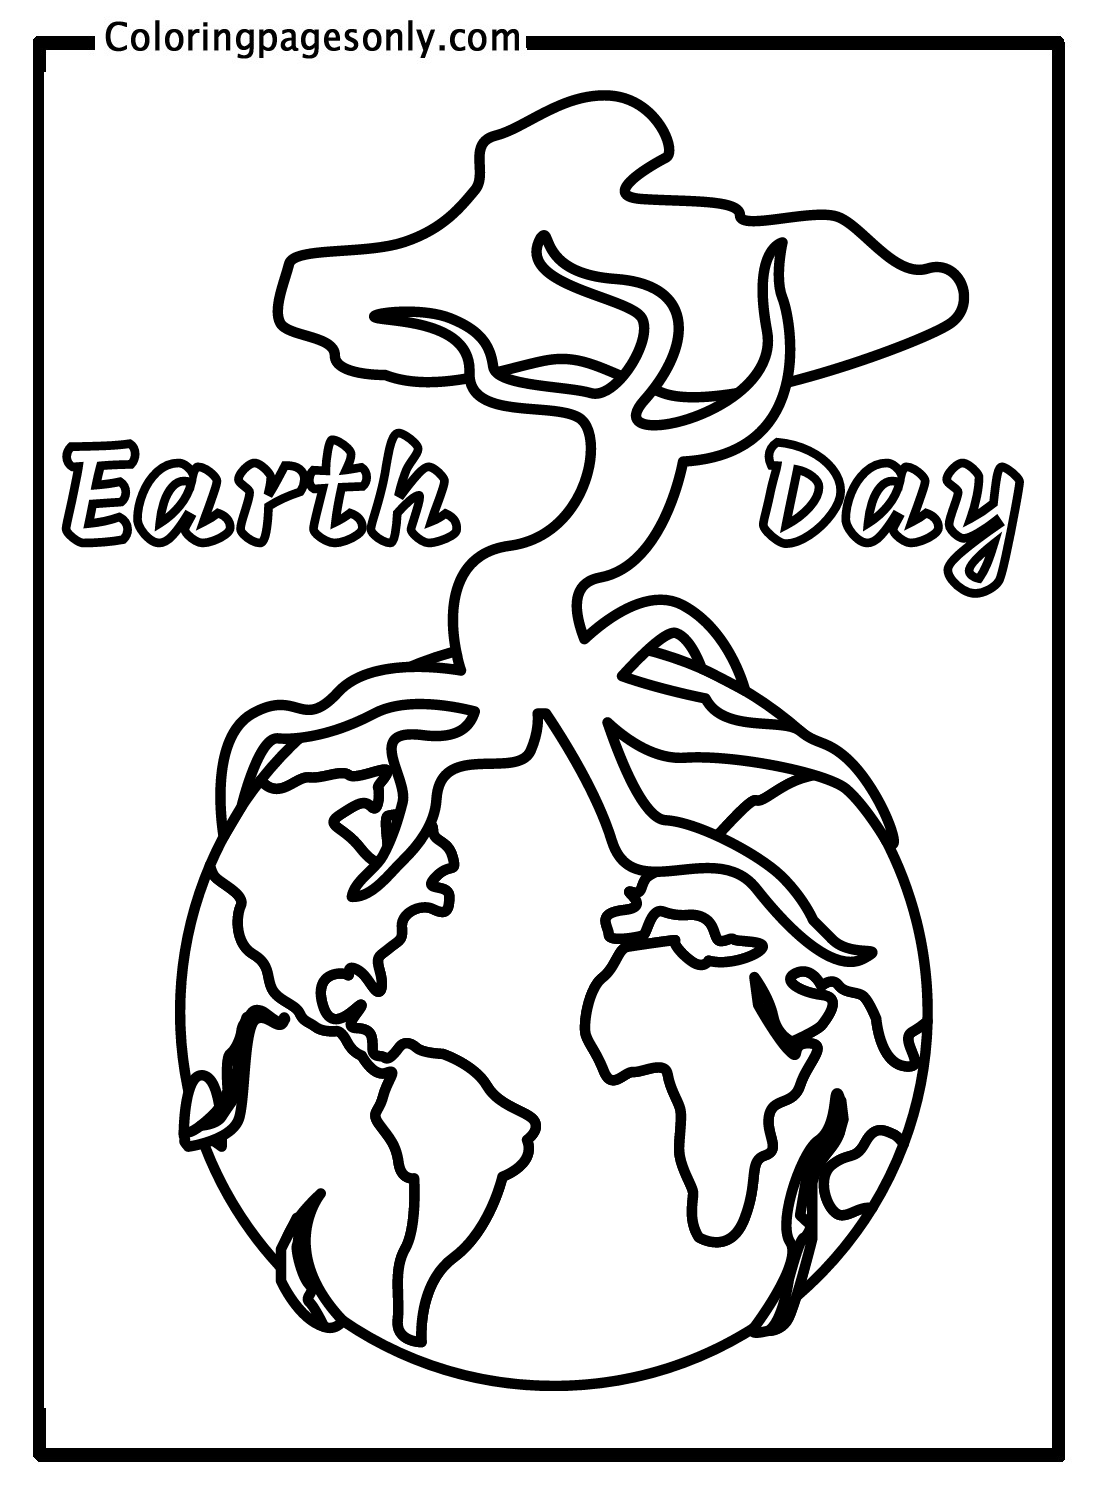 Earth Day Color Sheets Coloring Pages